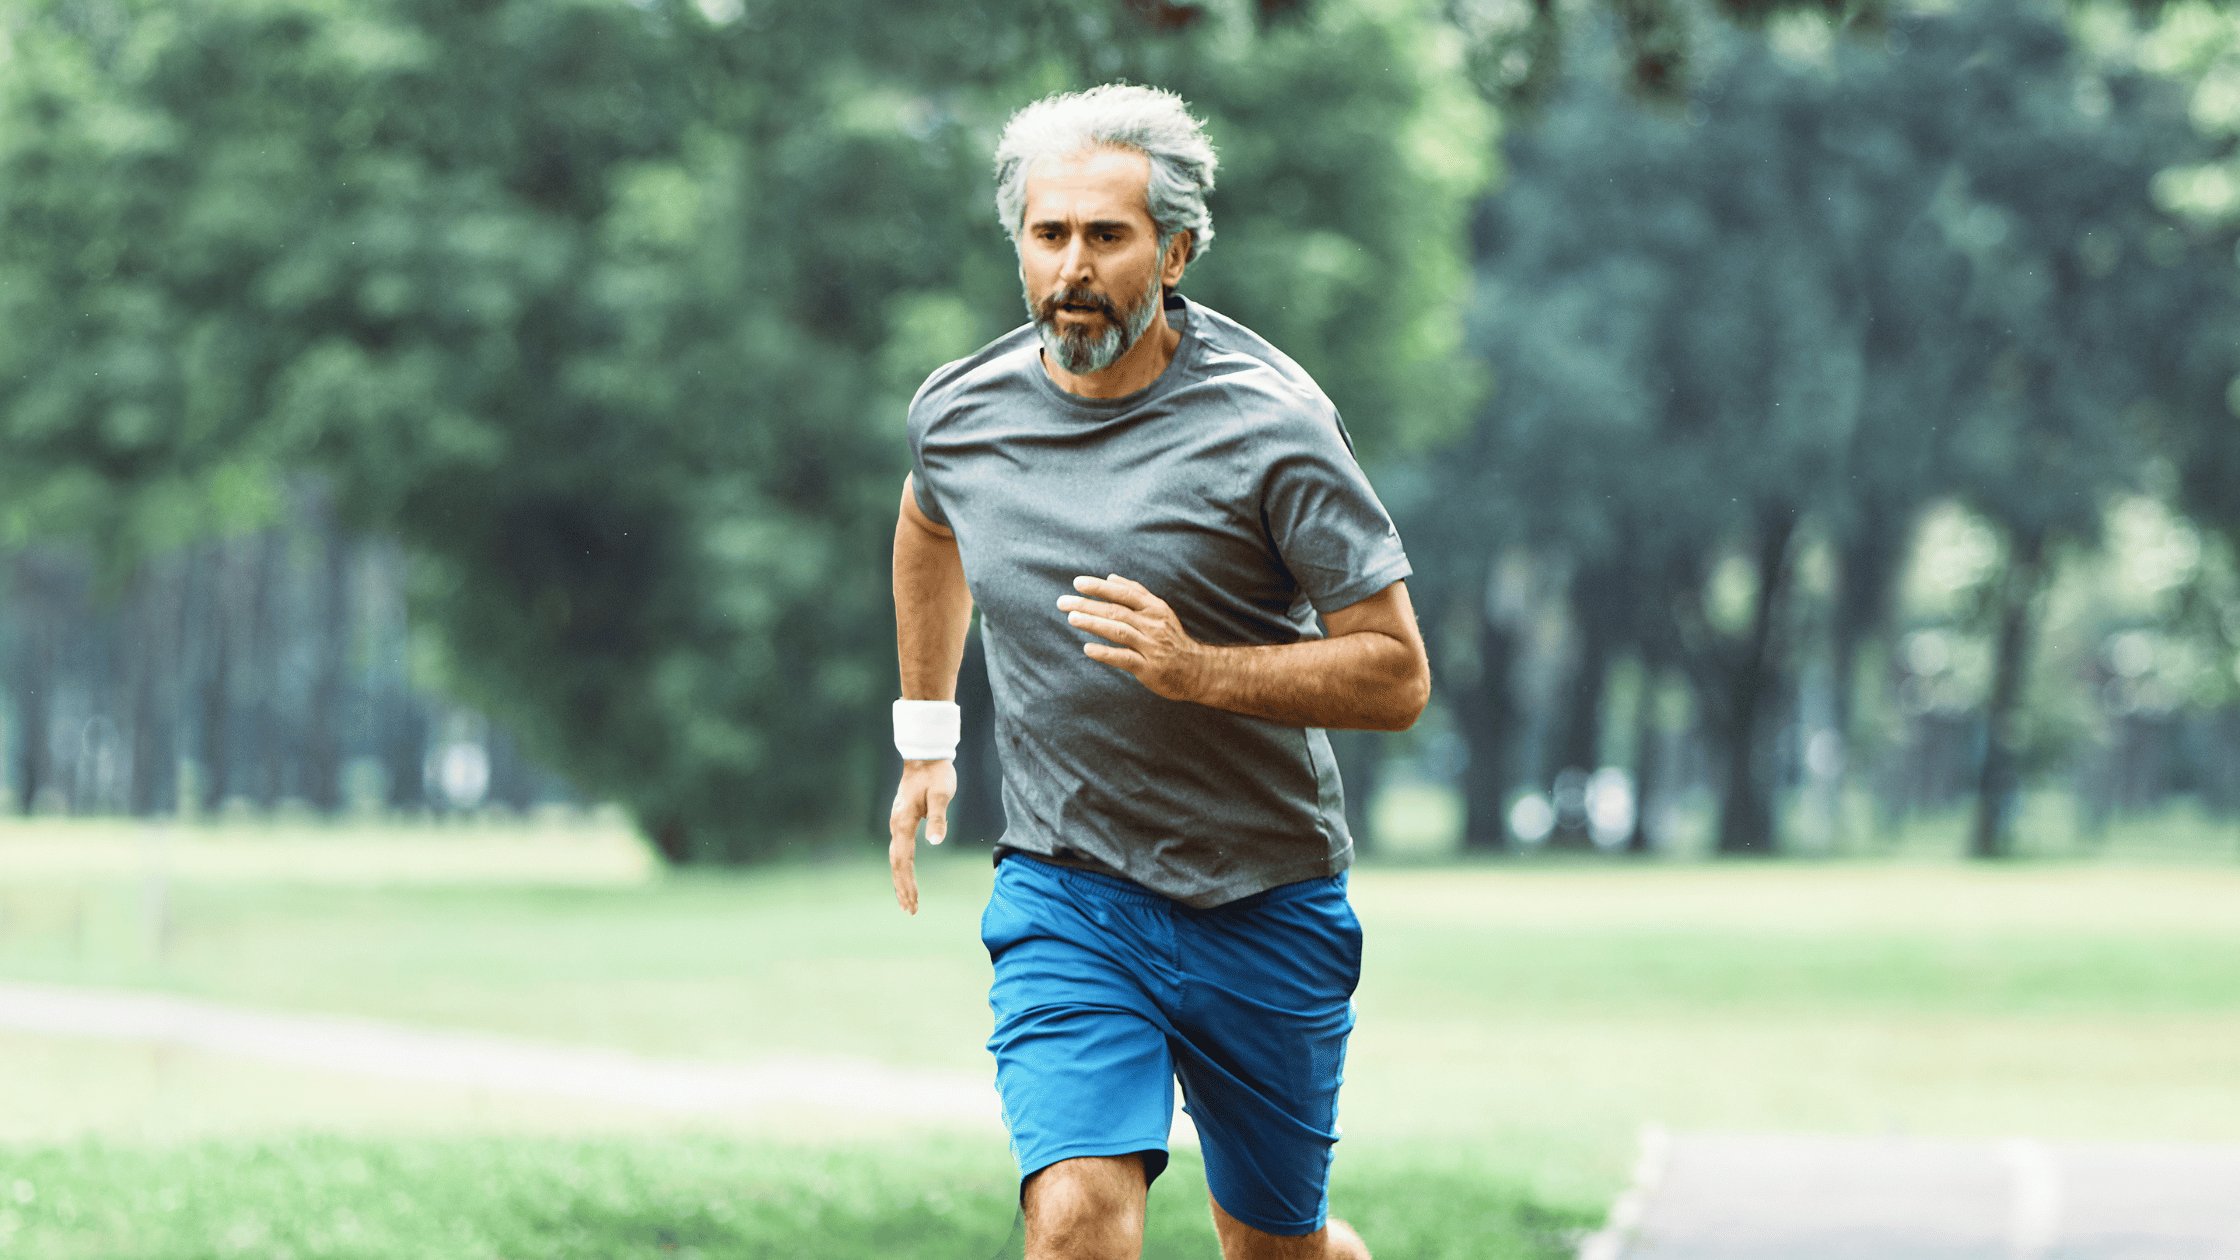 Couch to Marathon Training Plan Your Age